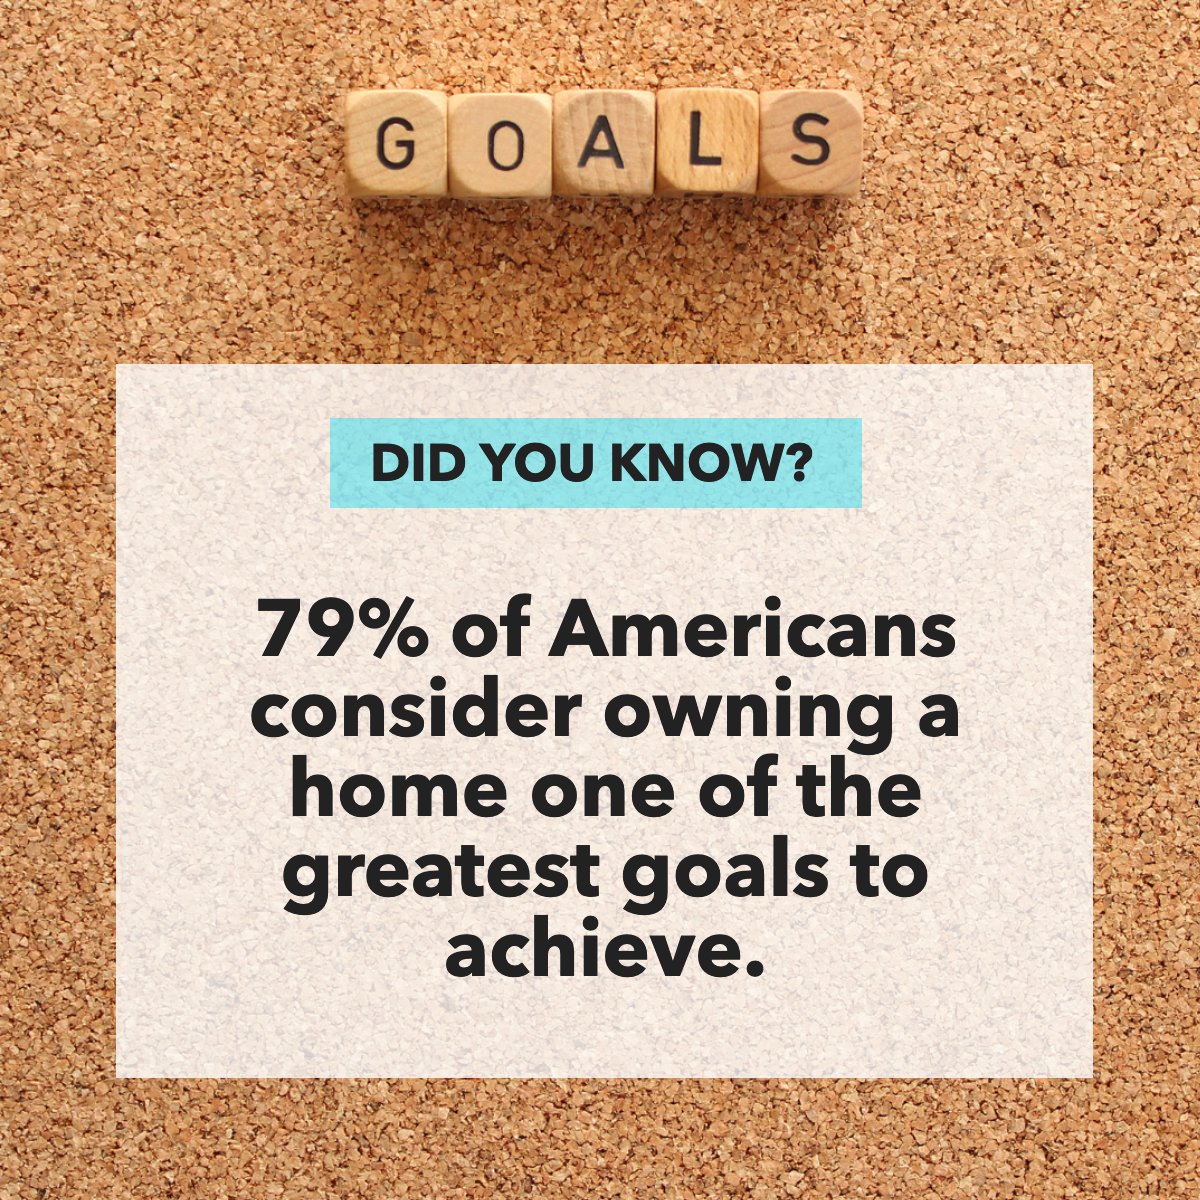 Is this one of your Goals? 🤔 

I think most people can identify with this goal!

#realestatefacts #homeowner #facts #goals
 #BorahRealtySource #Borahsdiditagain #Borahsoldit #bestteamintown #6788737018 #HouseHunting #Newhome #Broker